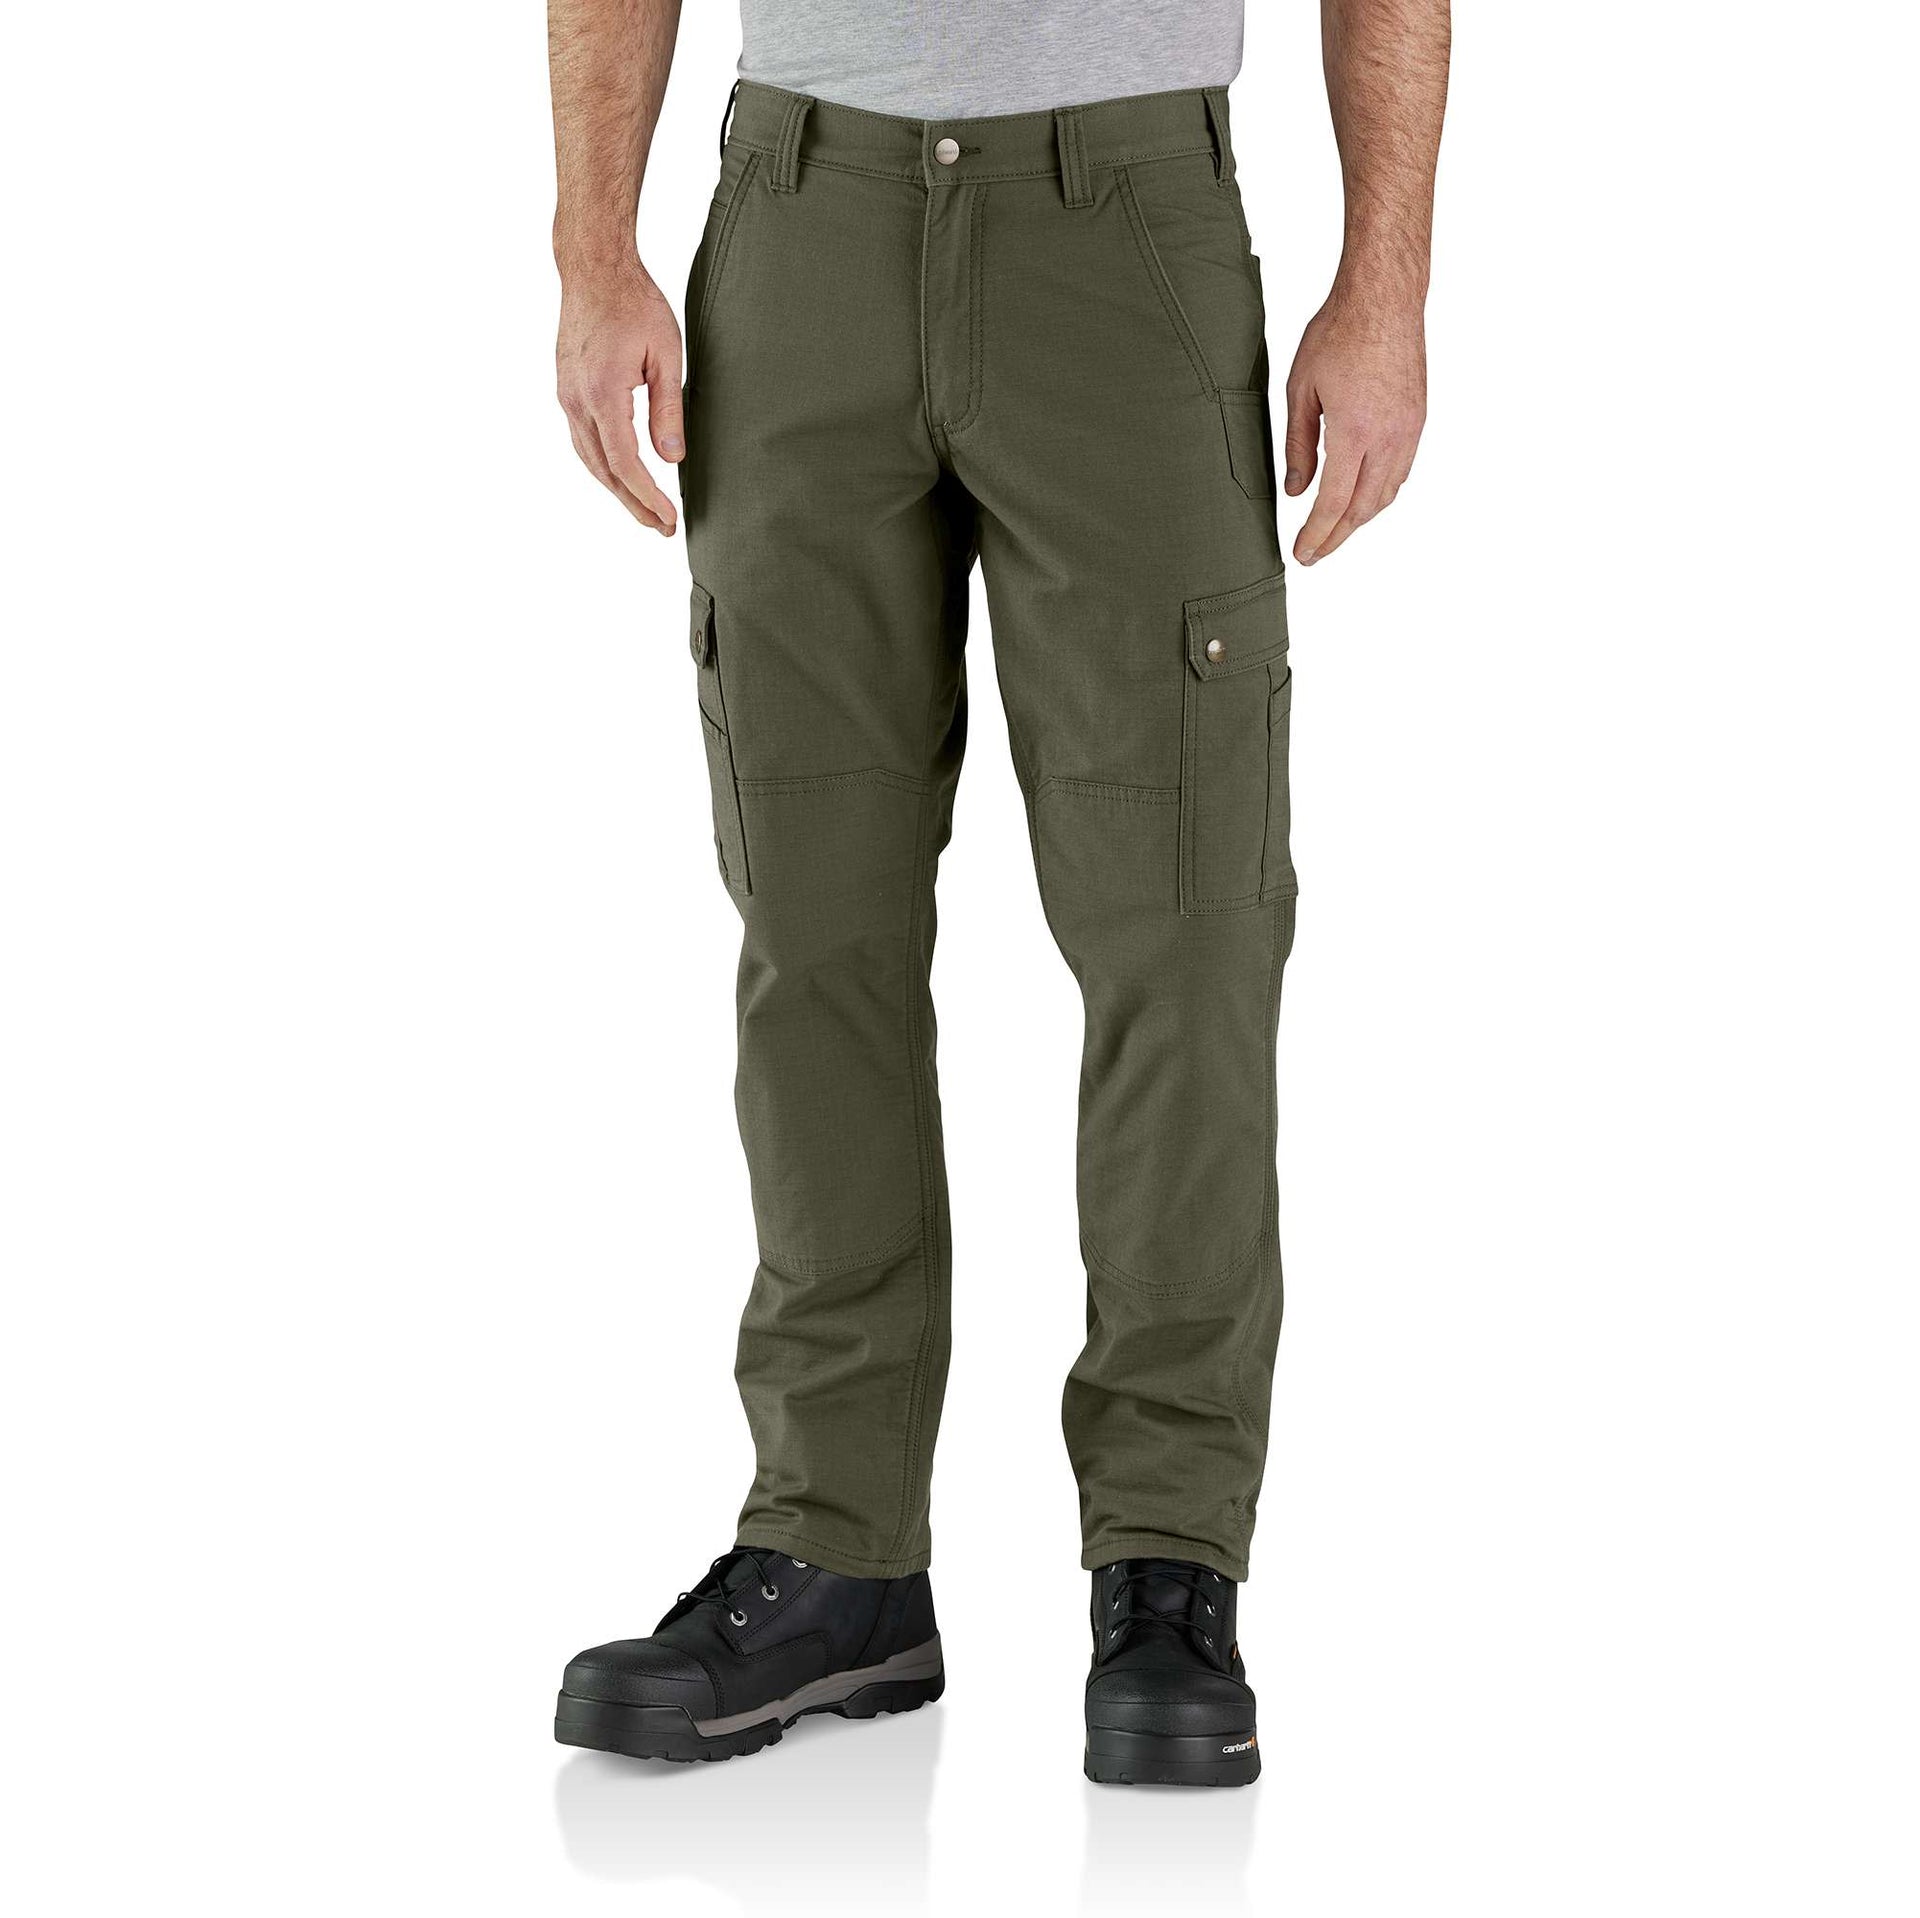 Cambridge Dry Goods Cotton Ripstop Roll-Up Cargo Pants - Save 45%